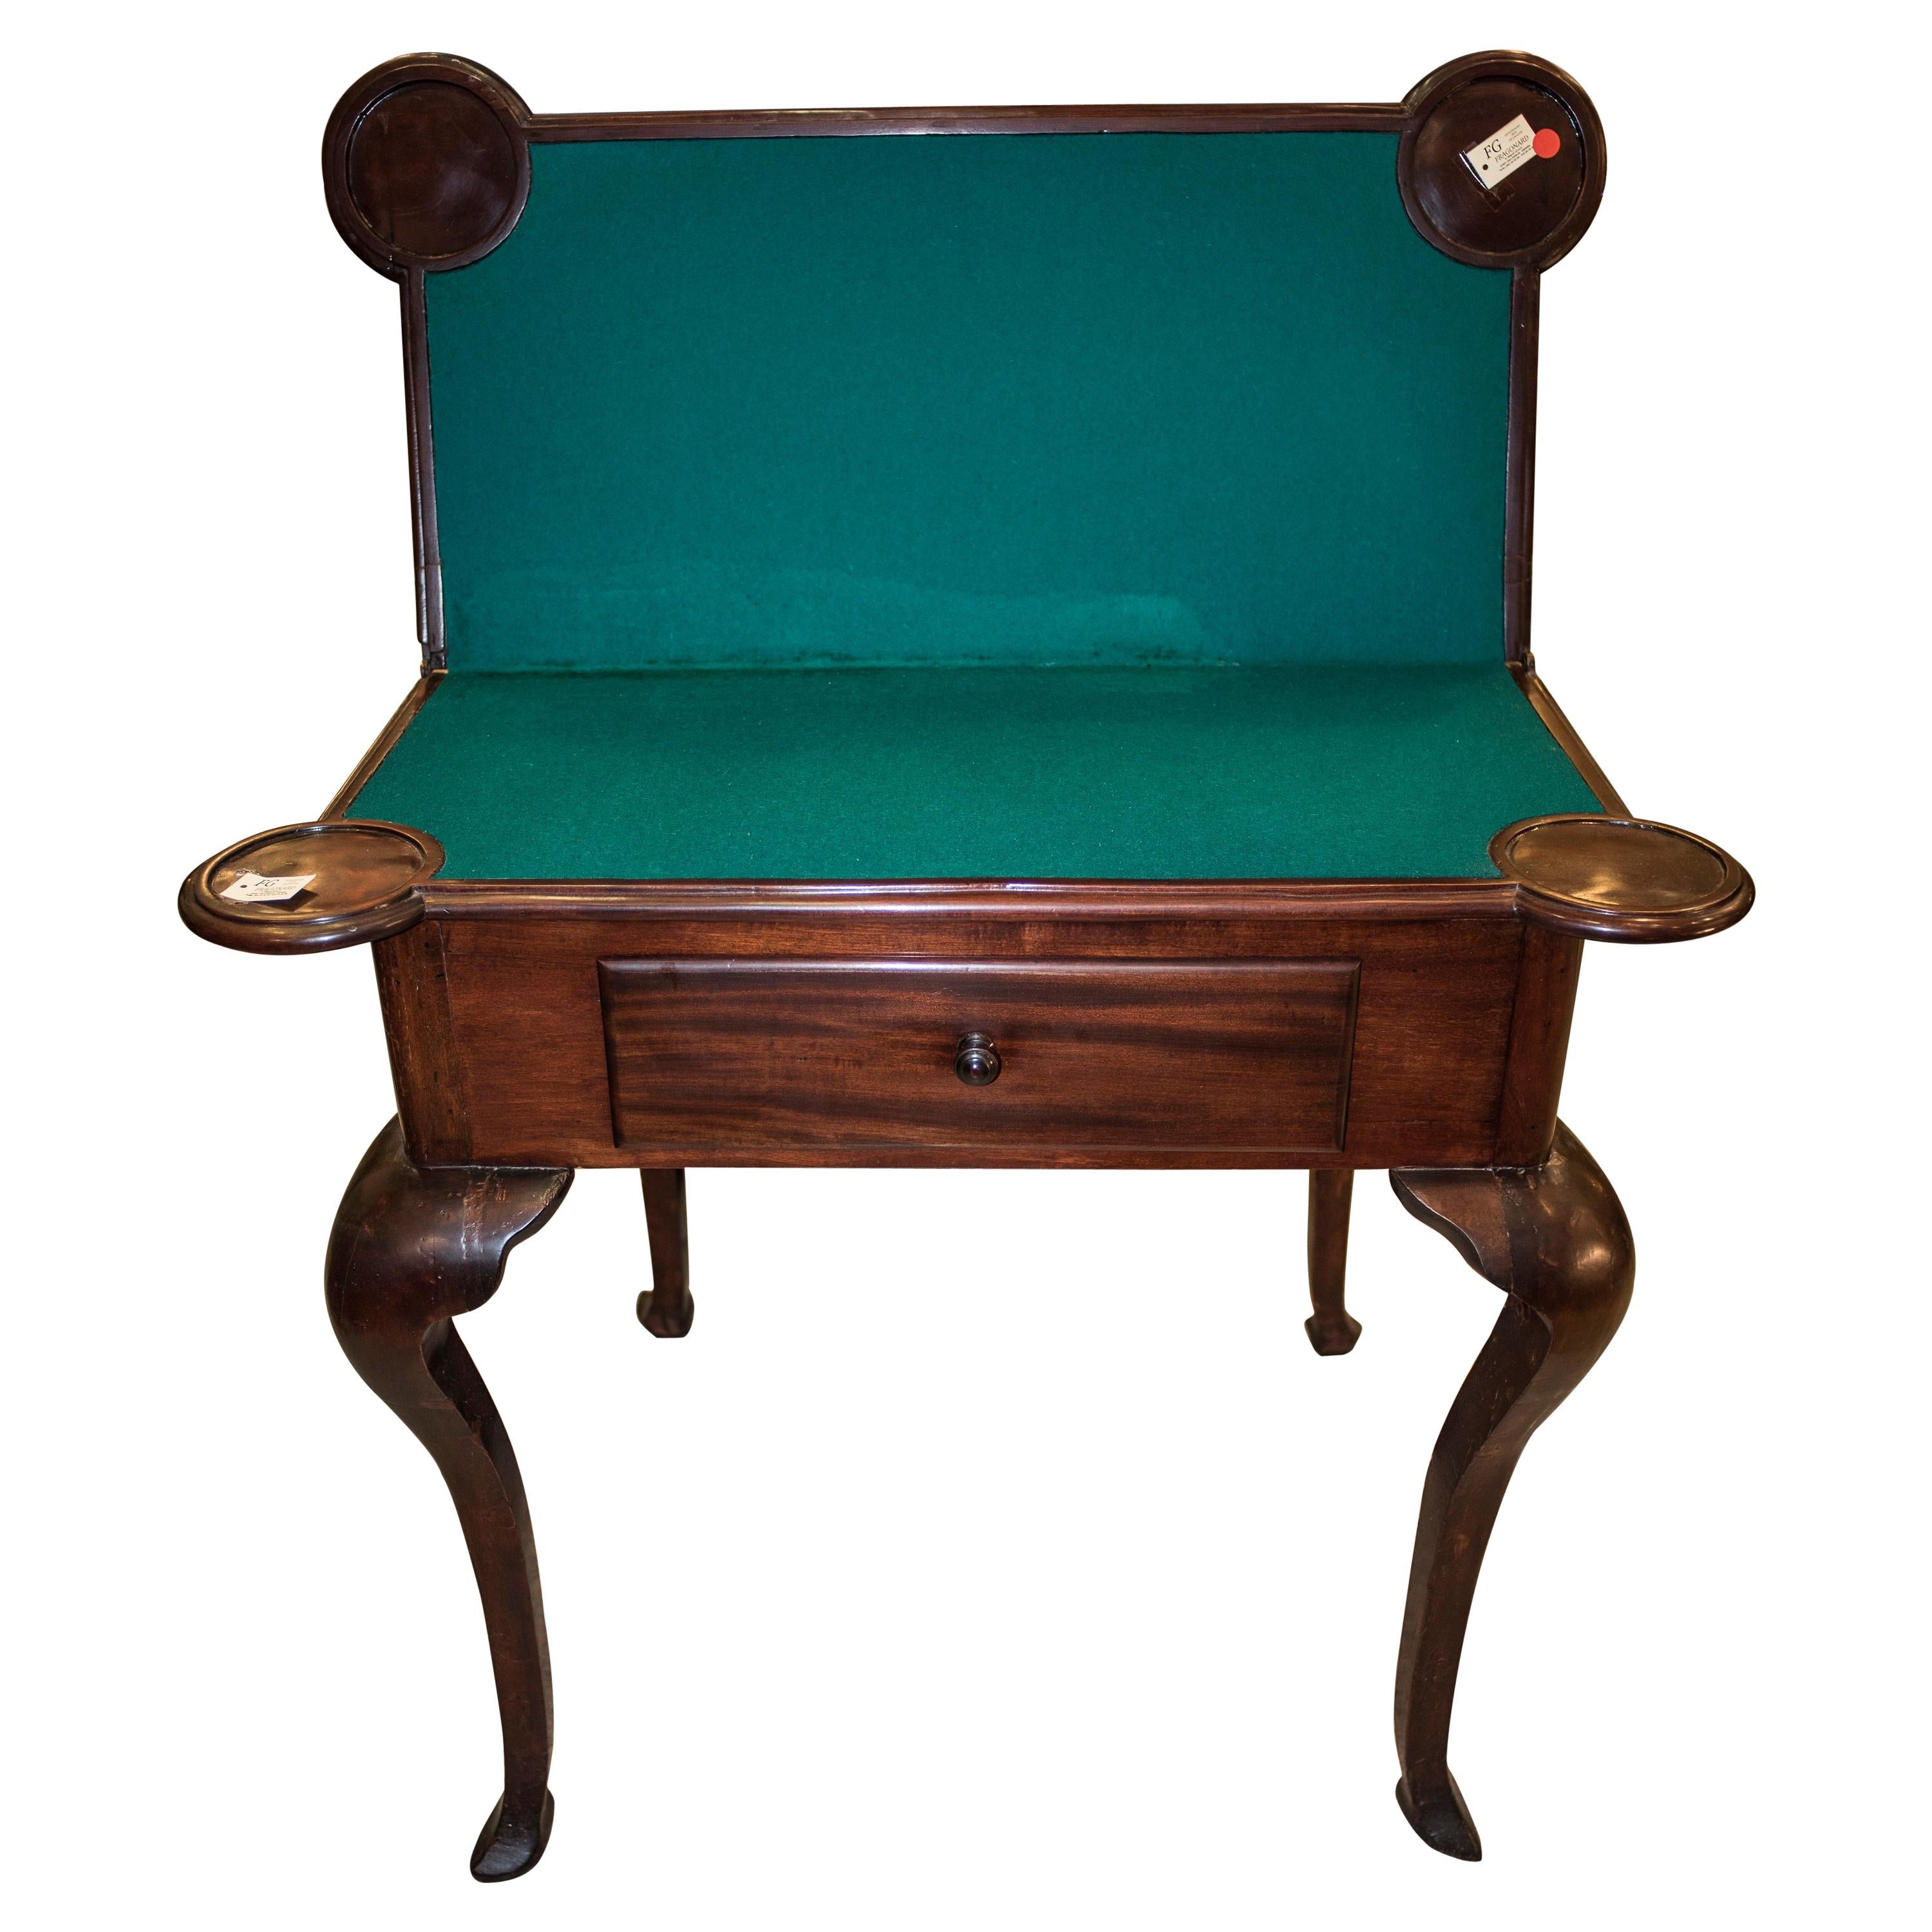 Late 19th Century Chippendale Style Mahogany Wood and Fabric English Table 1880s